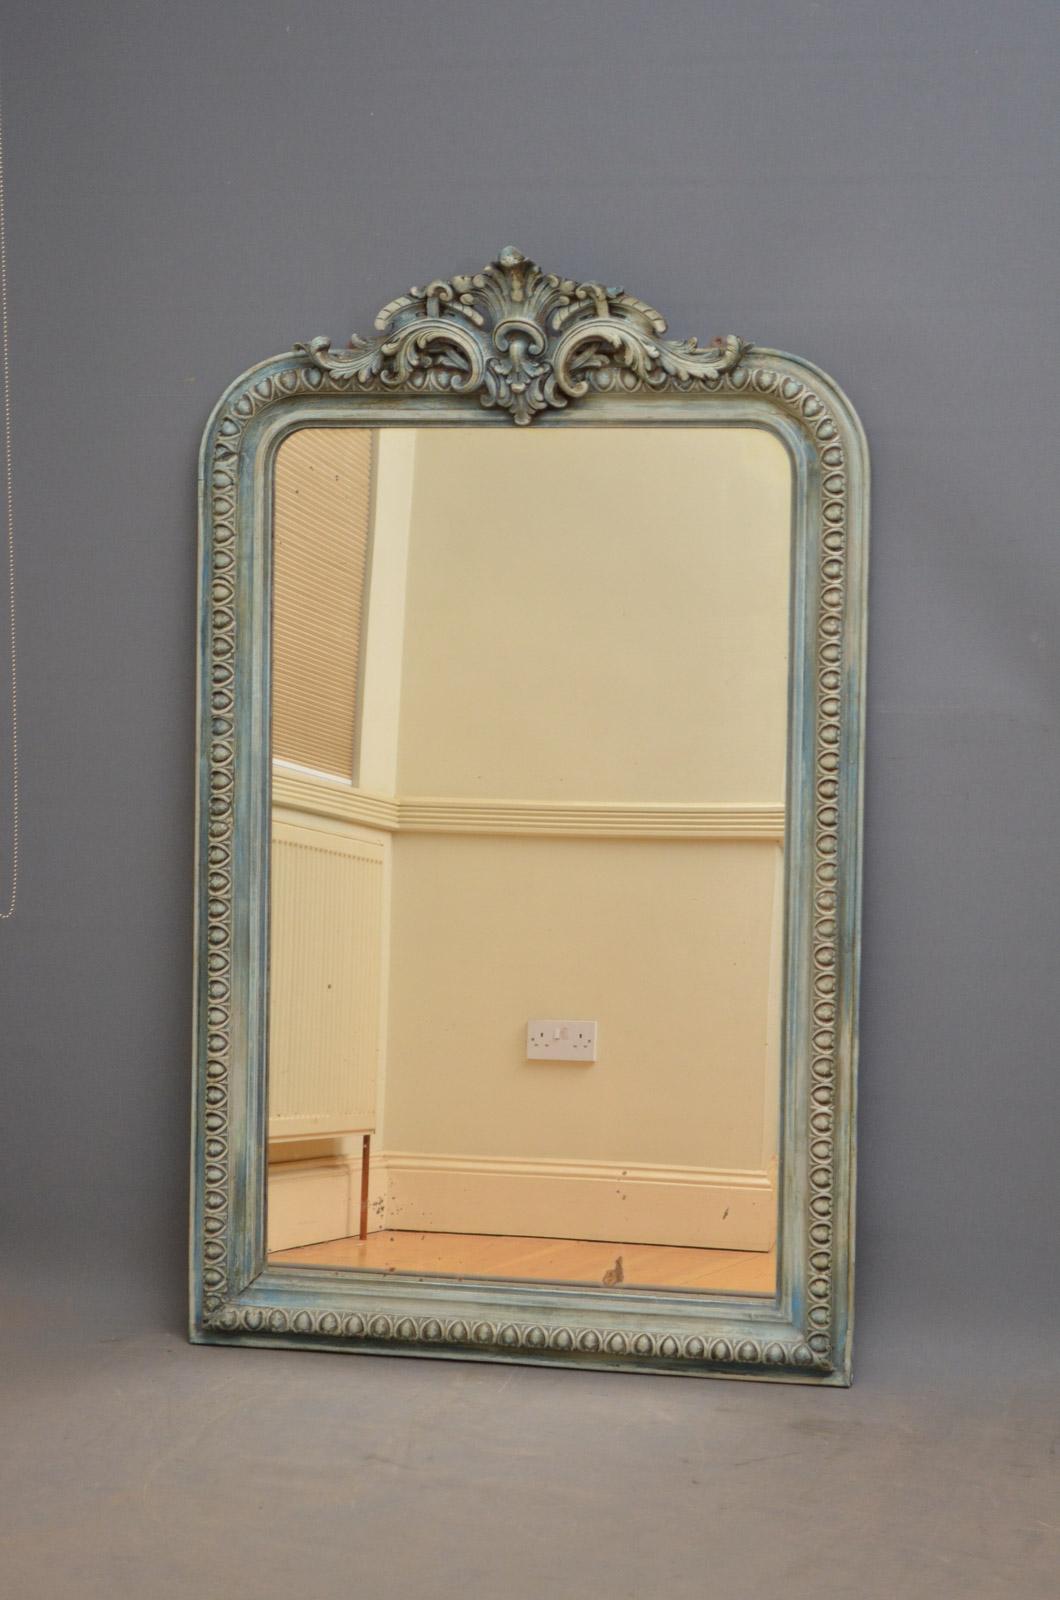 Sn4558, very attractive late 19th century overmantel mirror in teal, having original mirror plate with some foxing in moulded and carved frame with scroll cartouche to centre, all in excellent home ready condition, circa 1880.
Measures: H 60